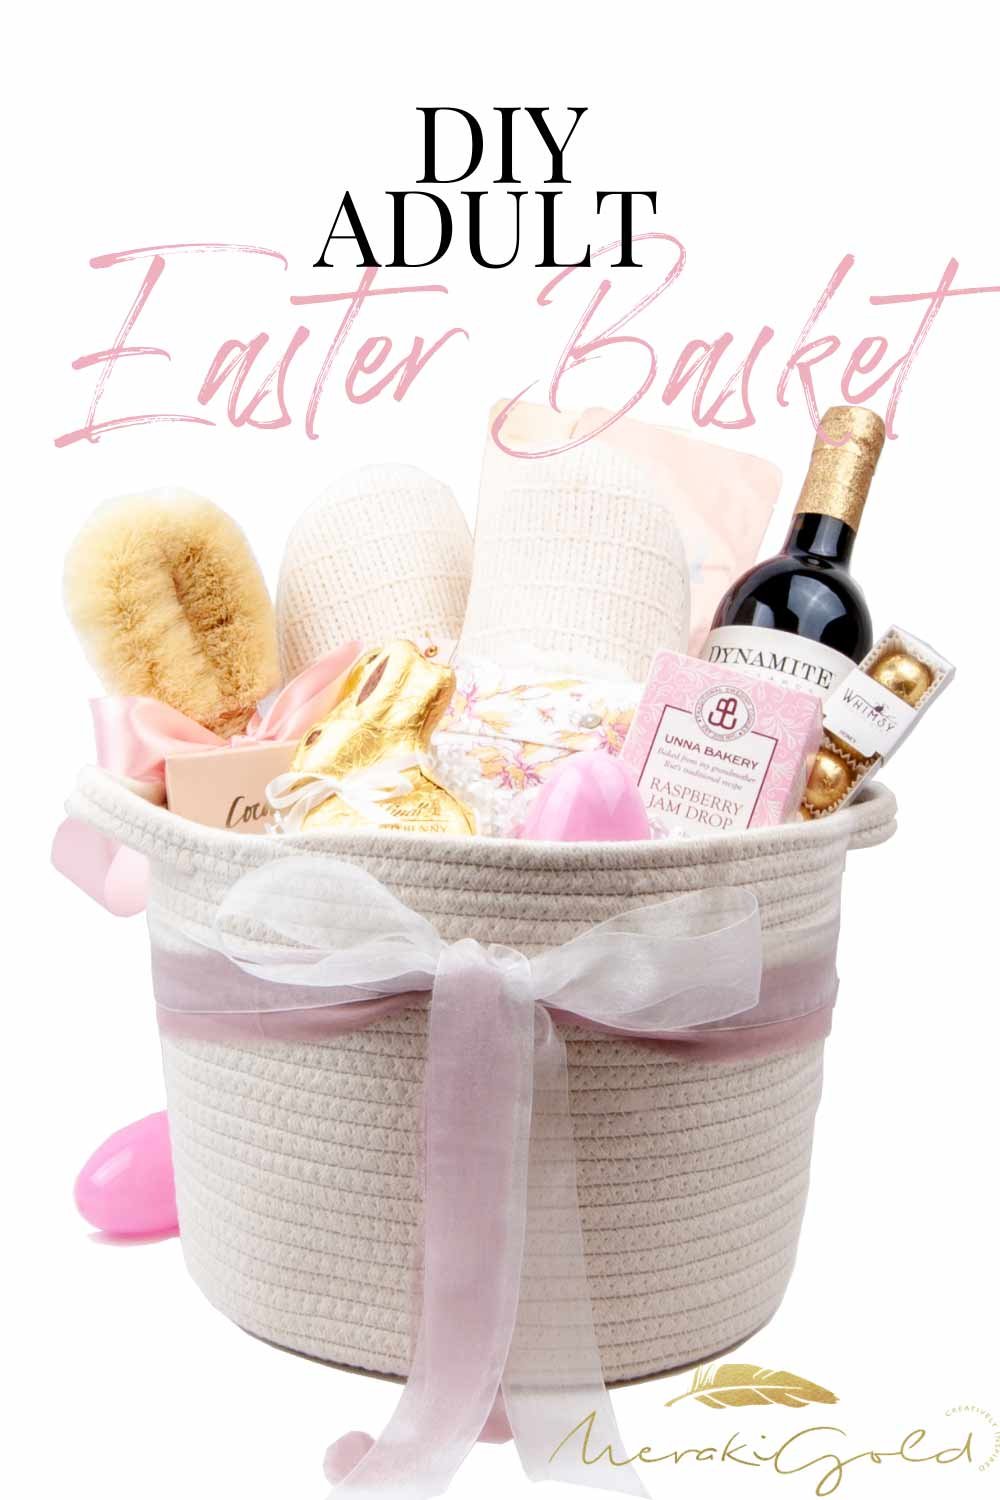 easter basket ideas for adults